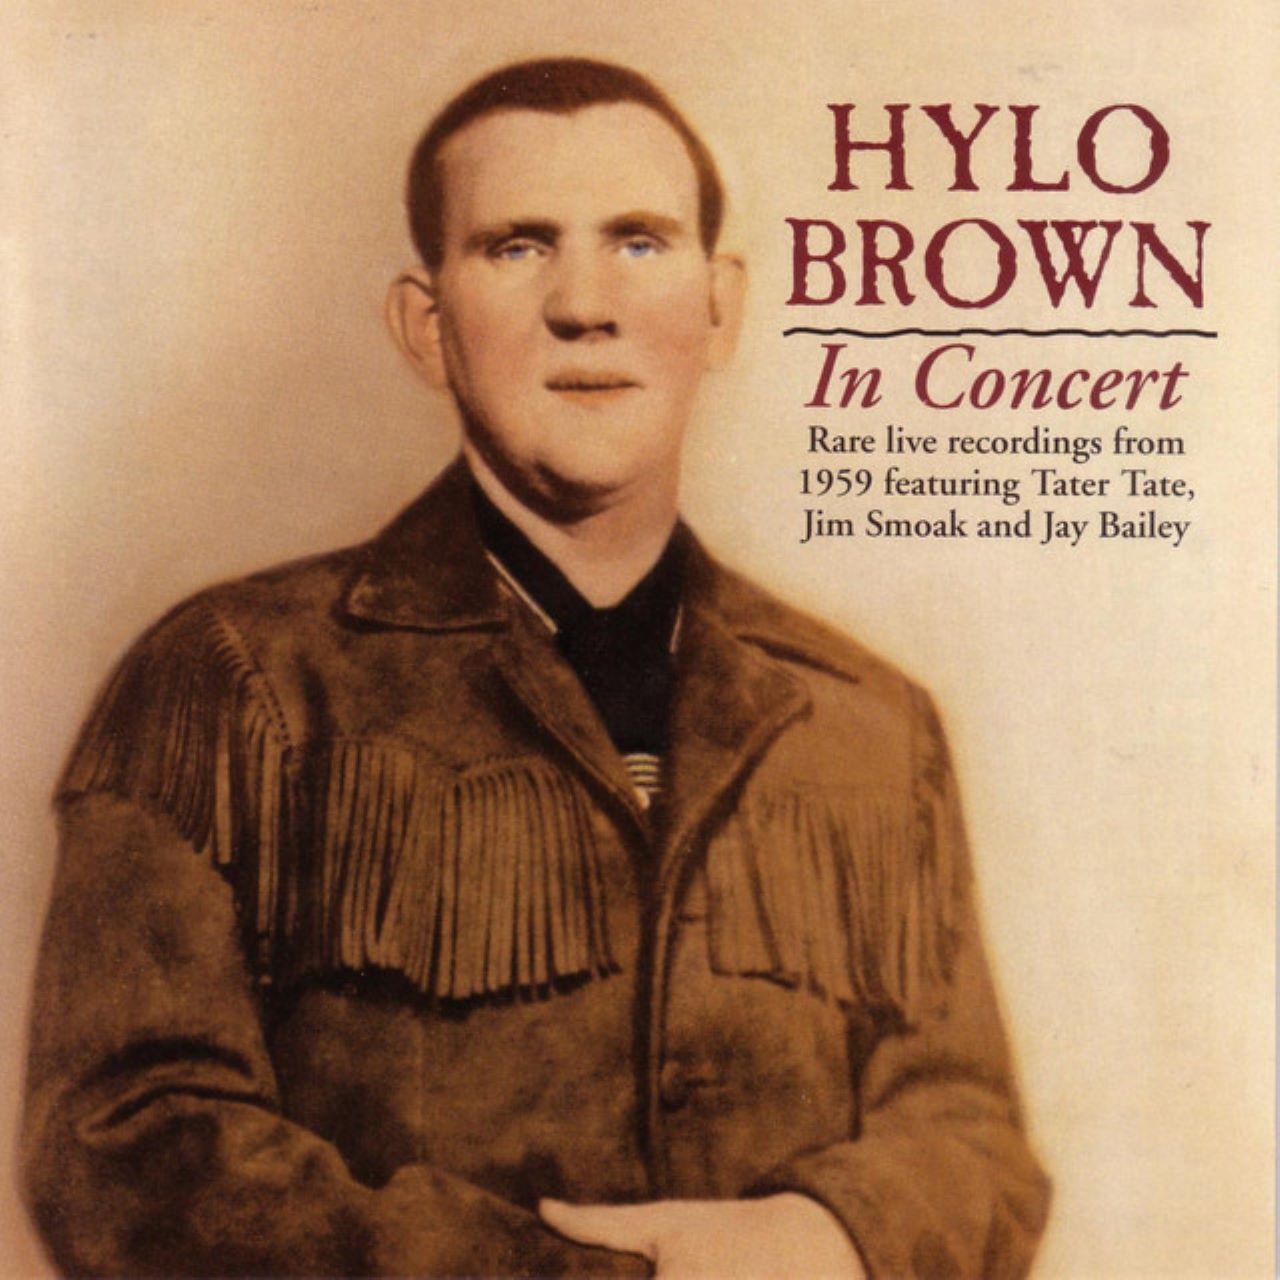 Hylo Brown - In Concert cover album